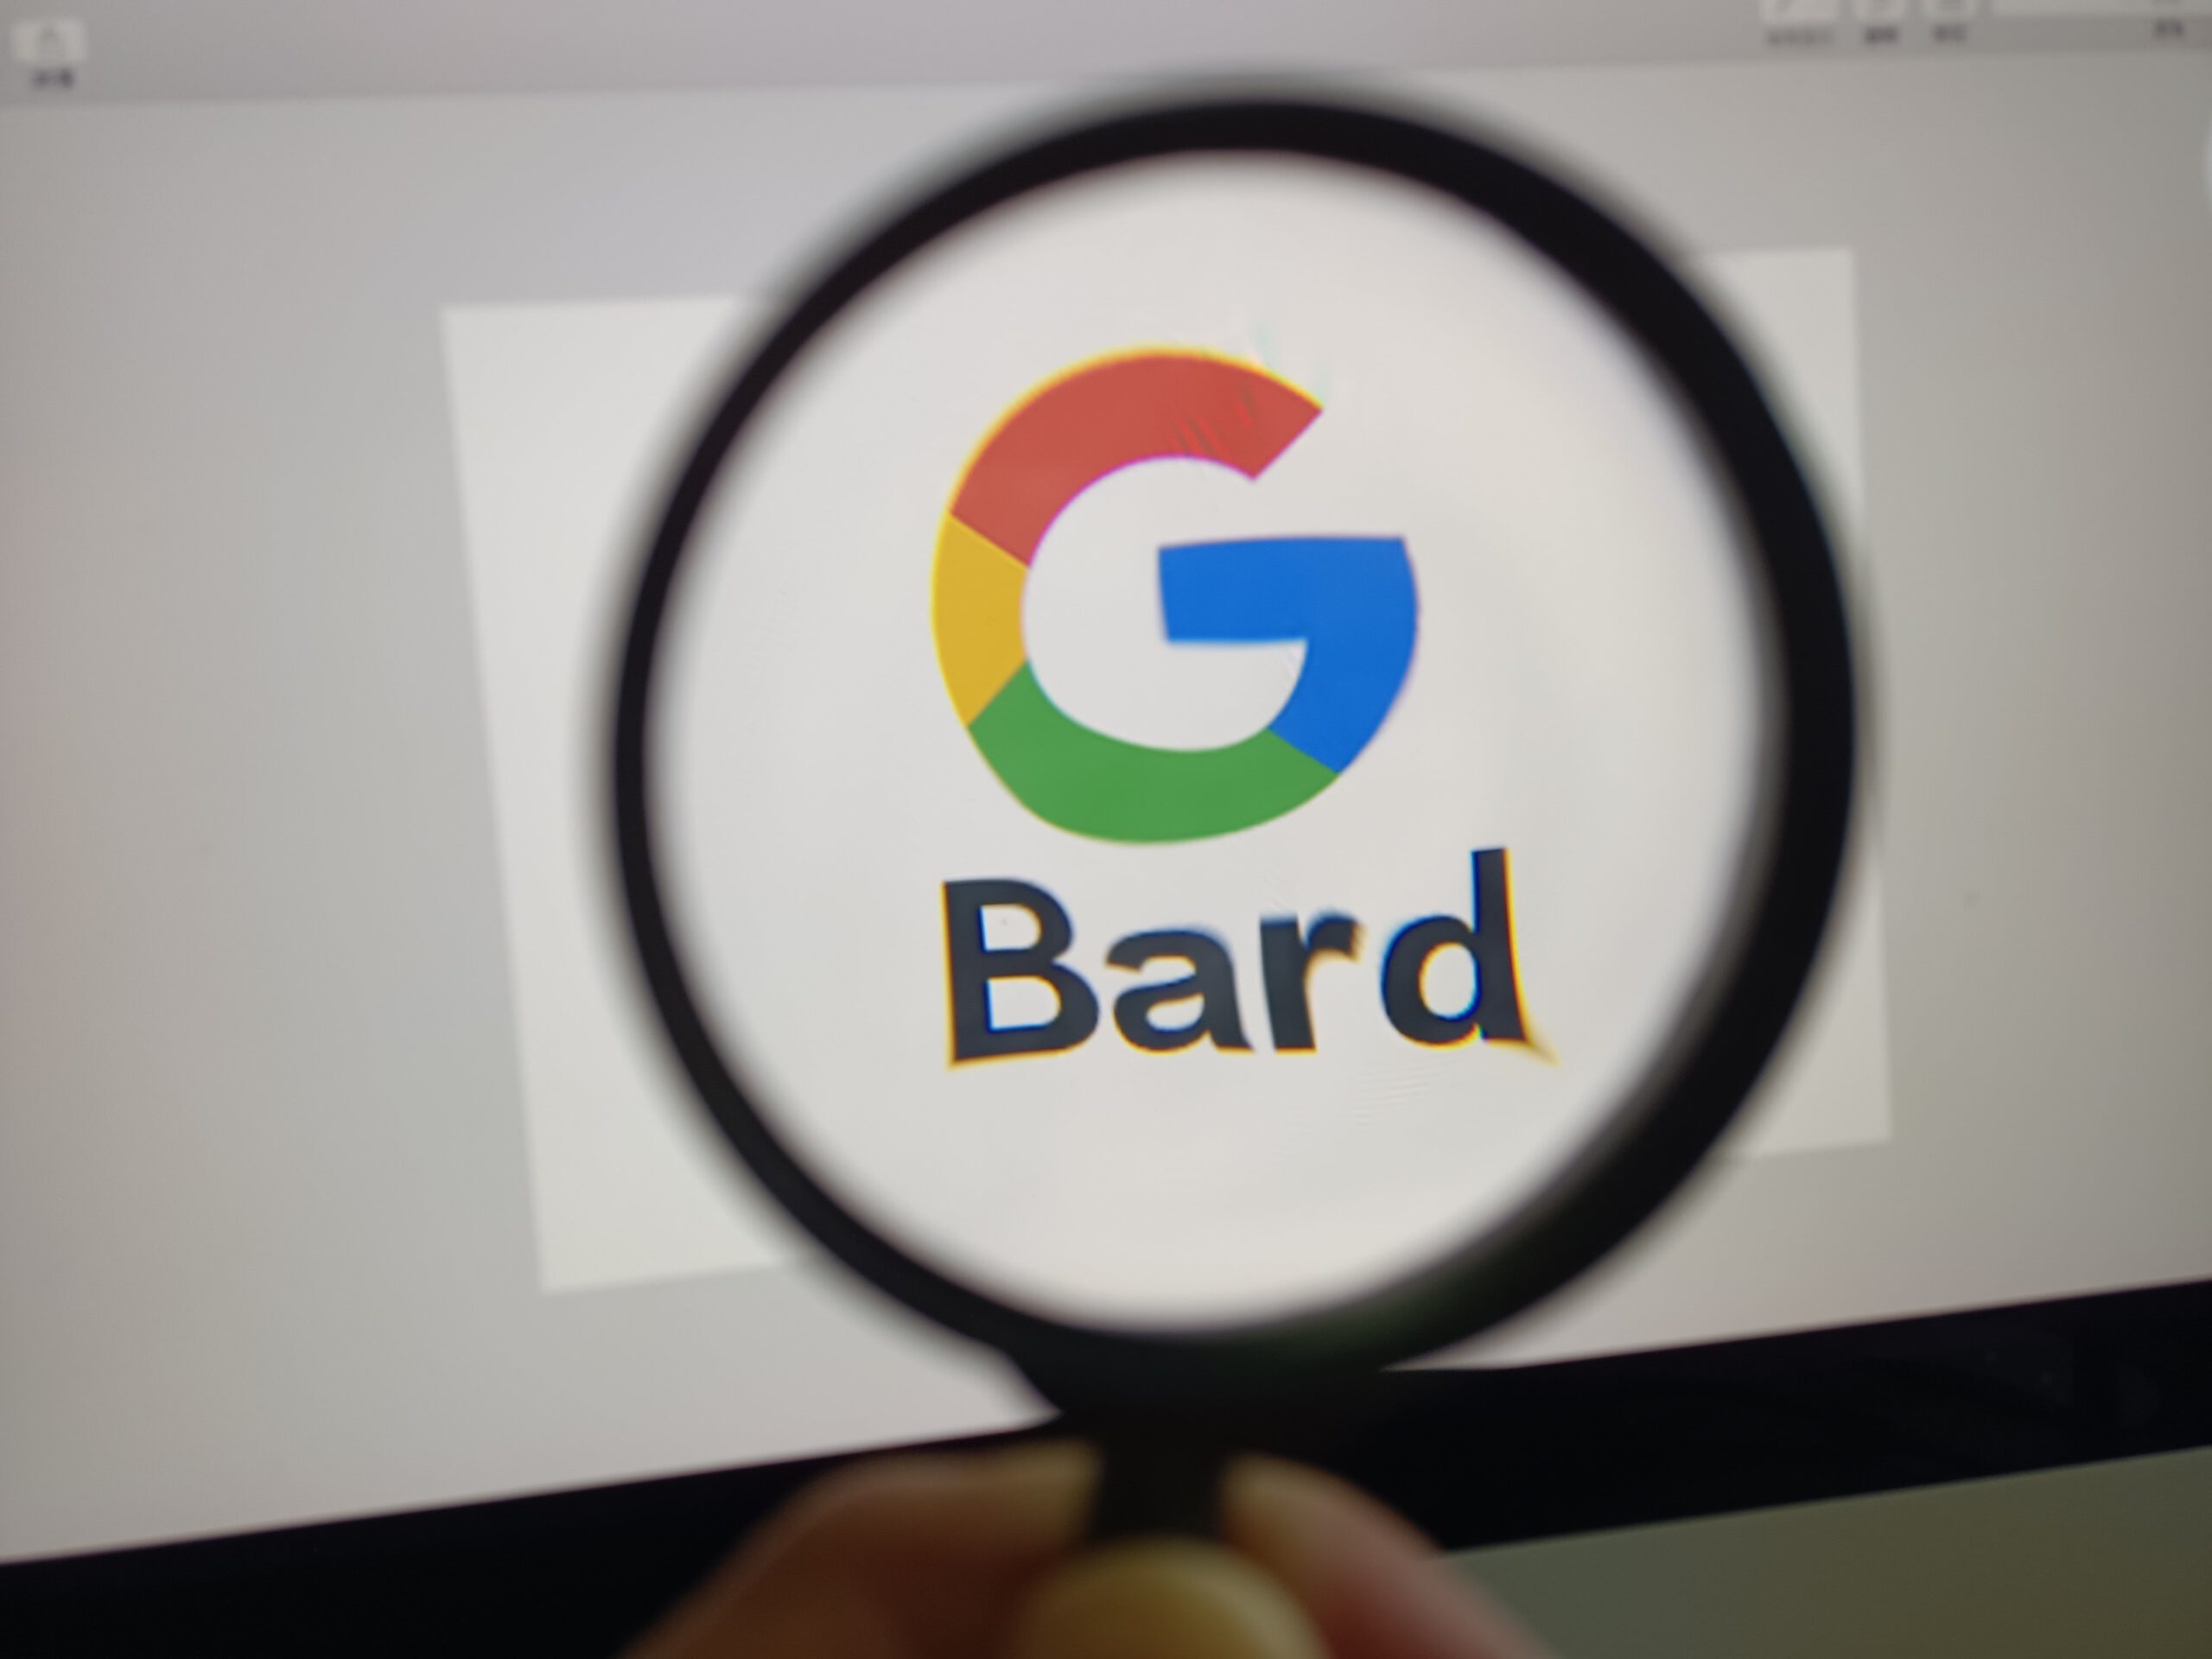 the Bard logo under a magnifying glass